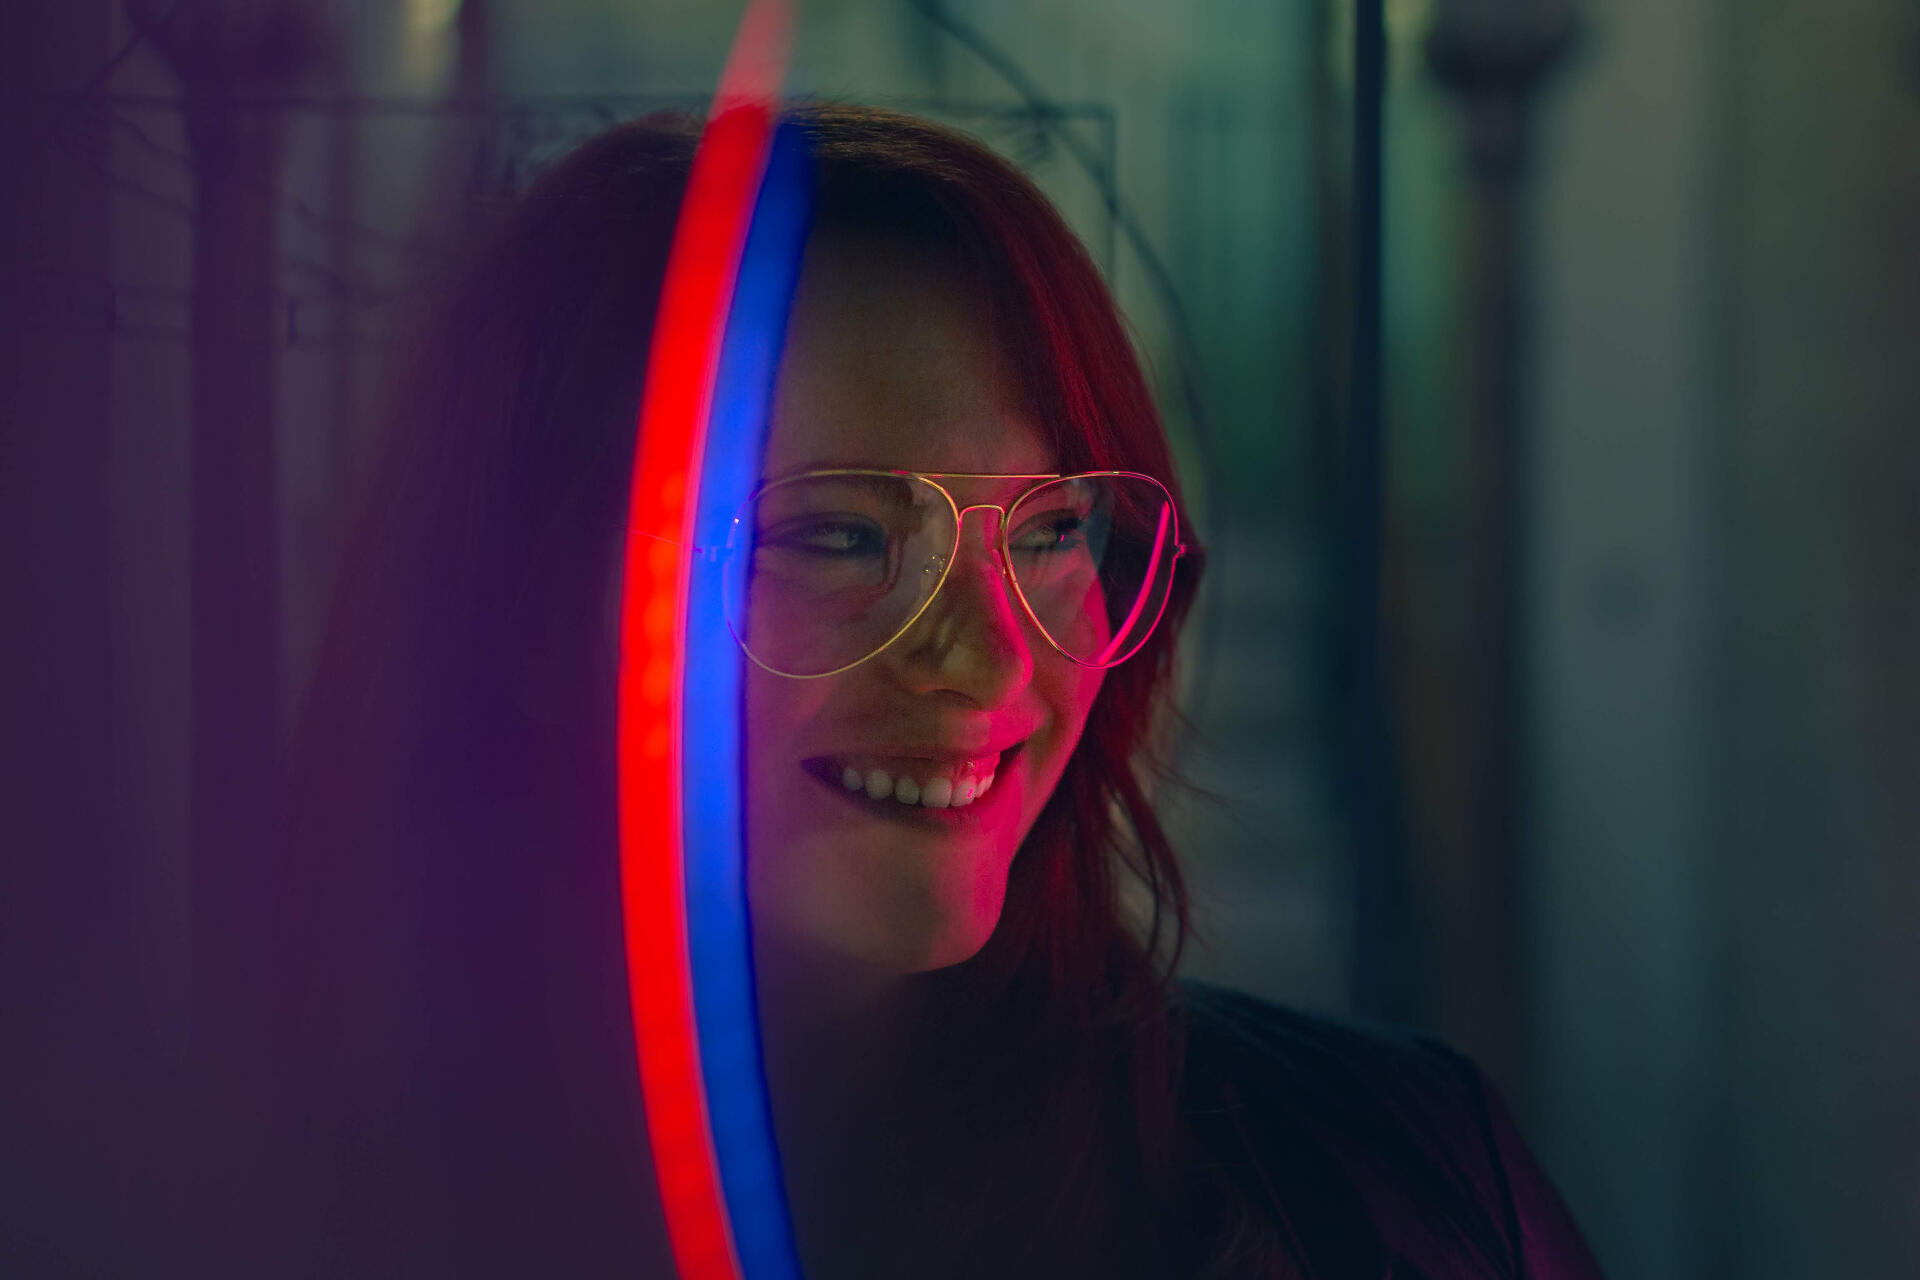 Girl with a colorful light band on her face smiling